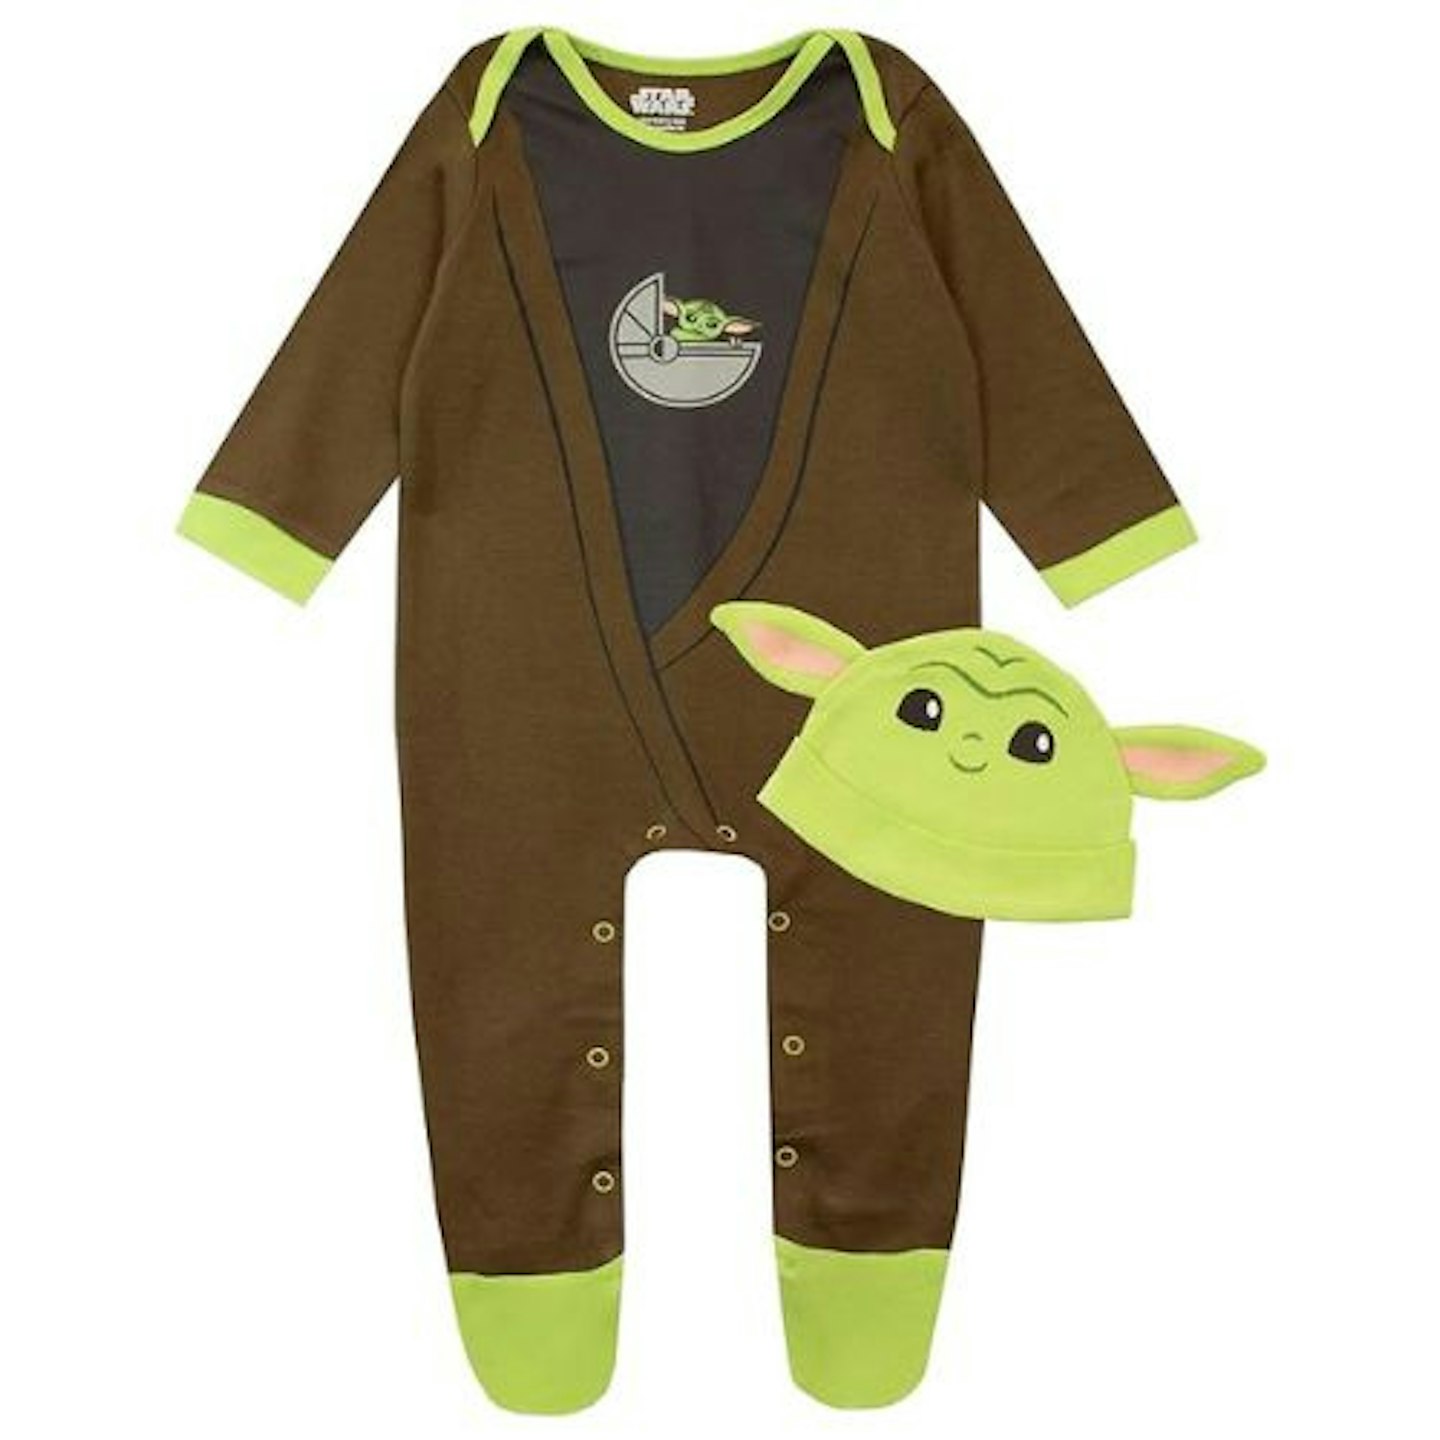 The Best Baby Halloween Costumes: Star Wars Baby Boys Sleepsuit and Hat Set 